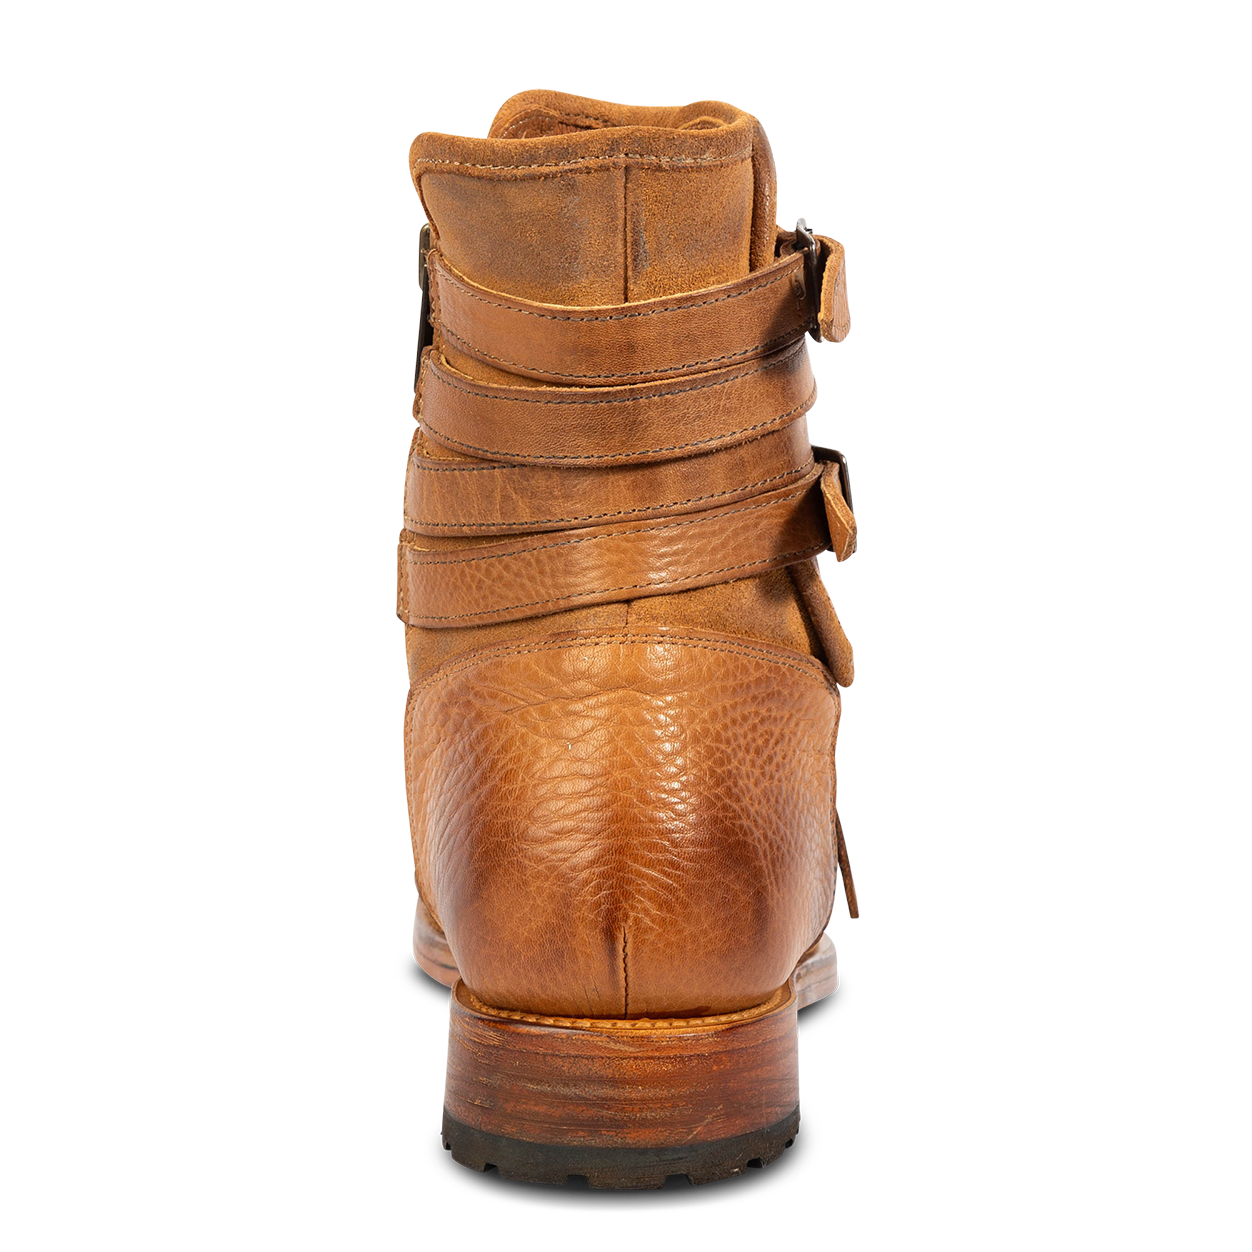 Back view showing four leather straps and low heel on FREEBIRD men's Pantera tan boot